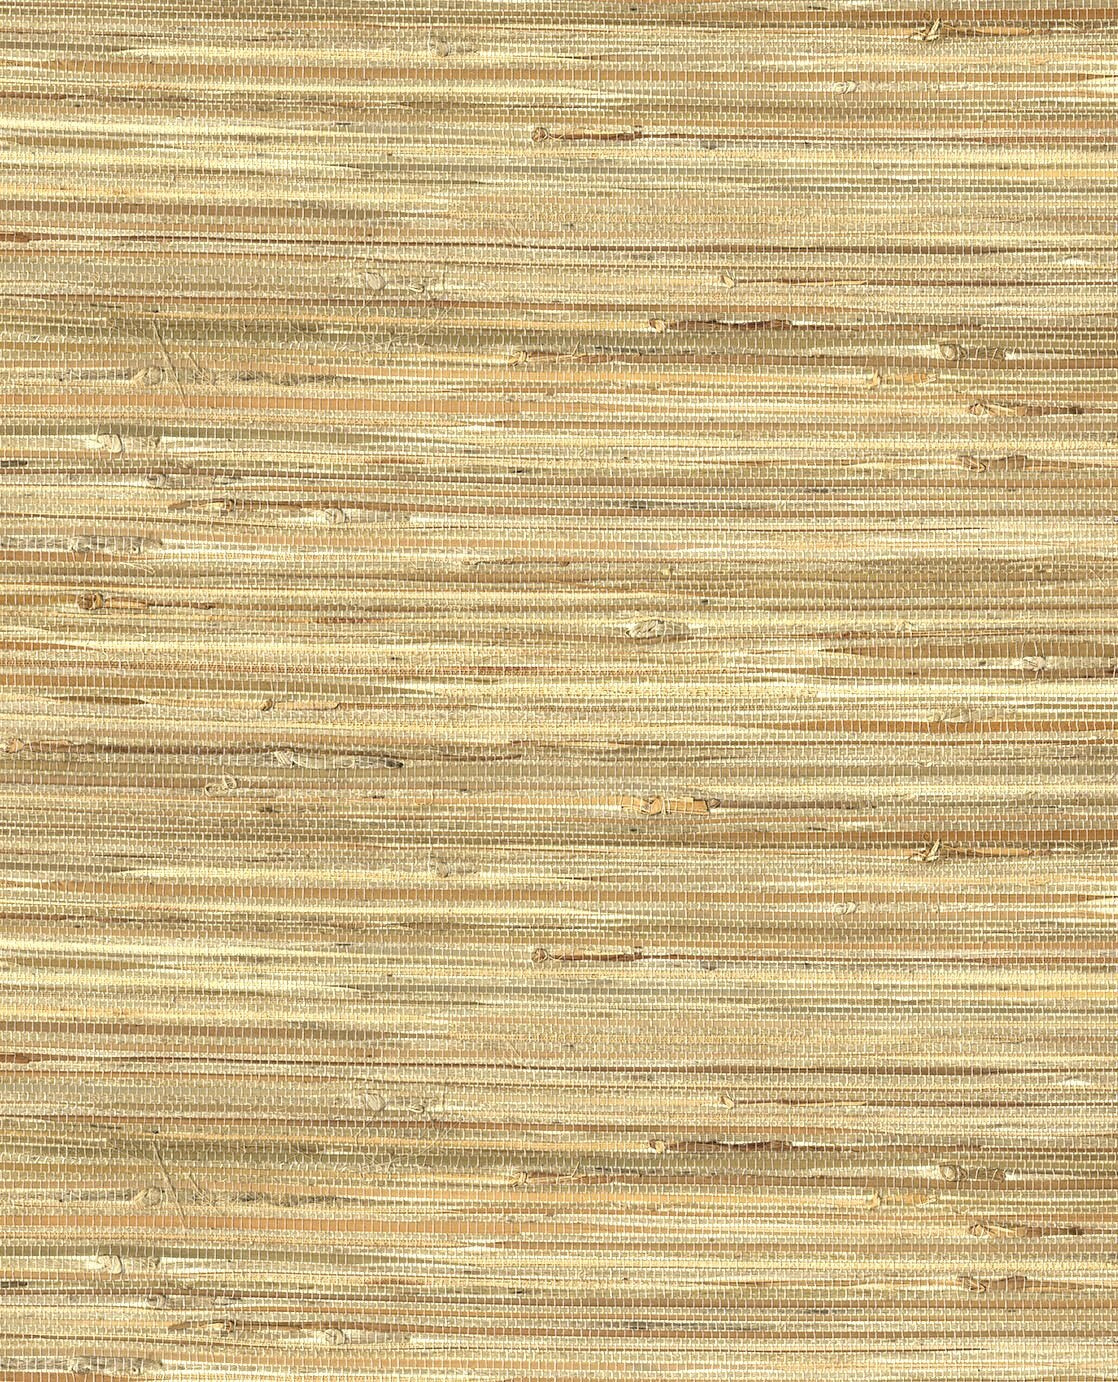 Natural Knotted Weave - Light Brown